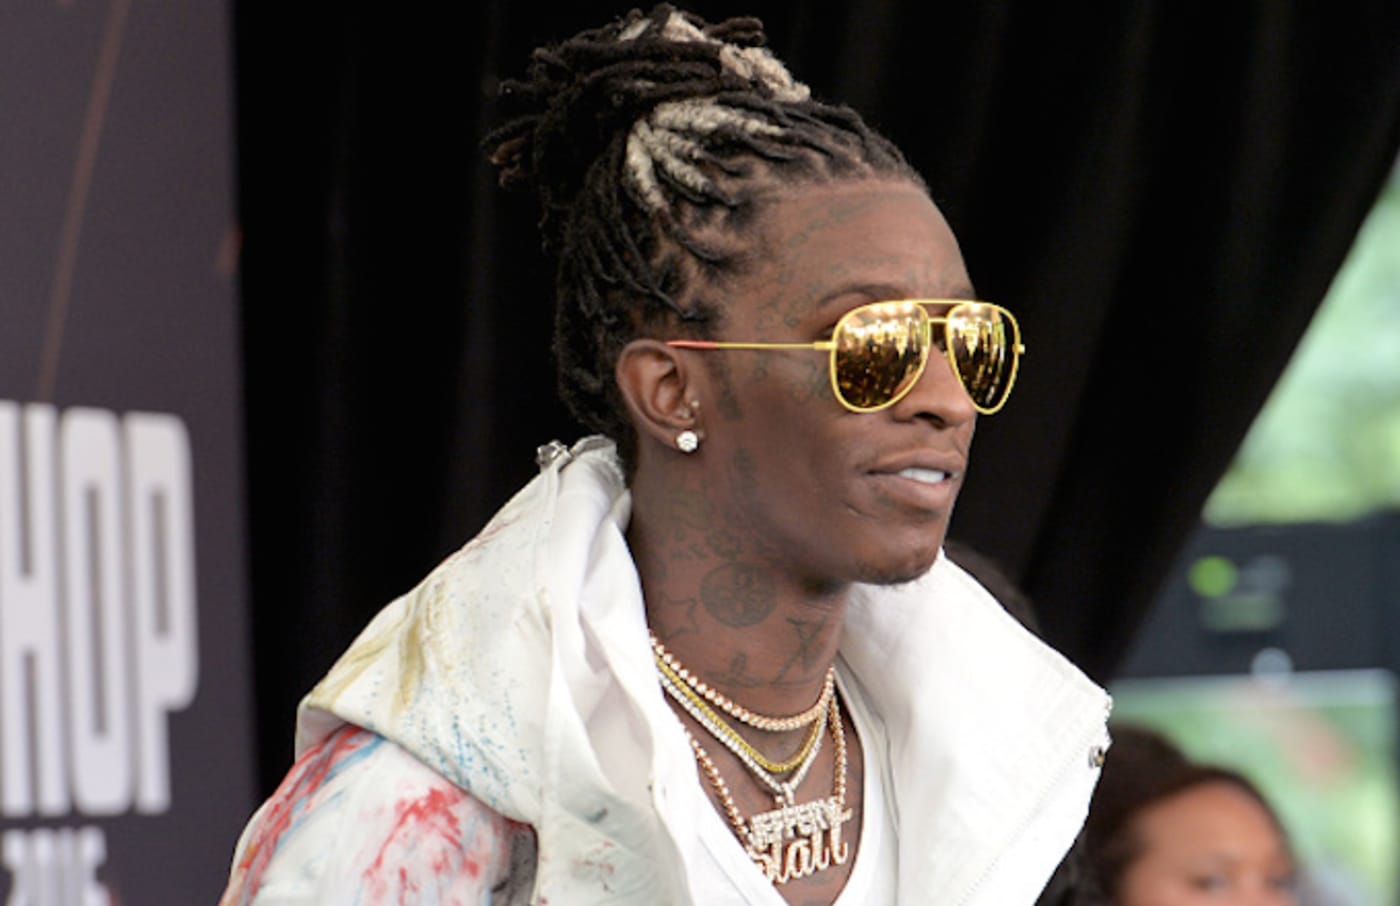 Young Thug attends the BET Hip Hop Awards 2016 Green Carpet